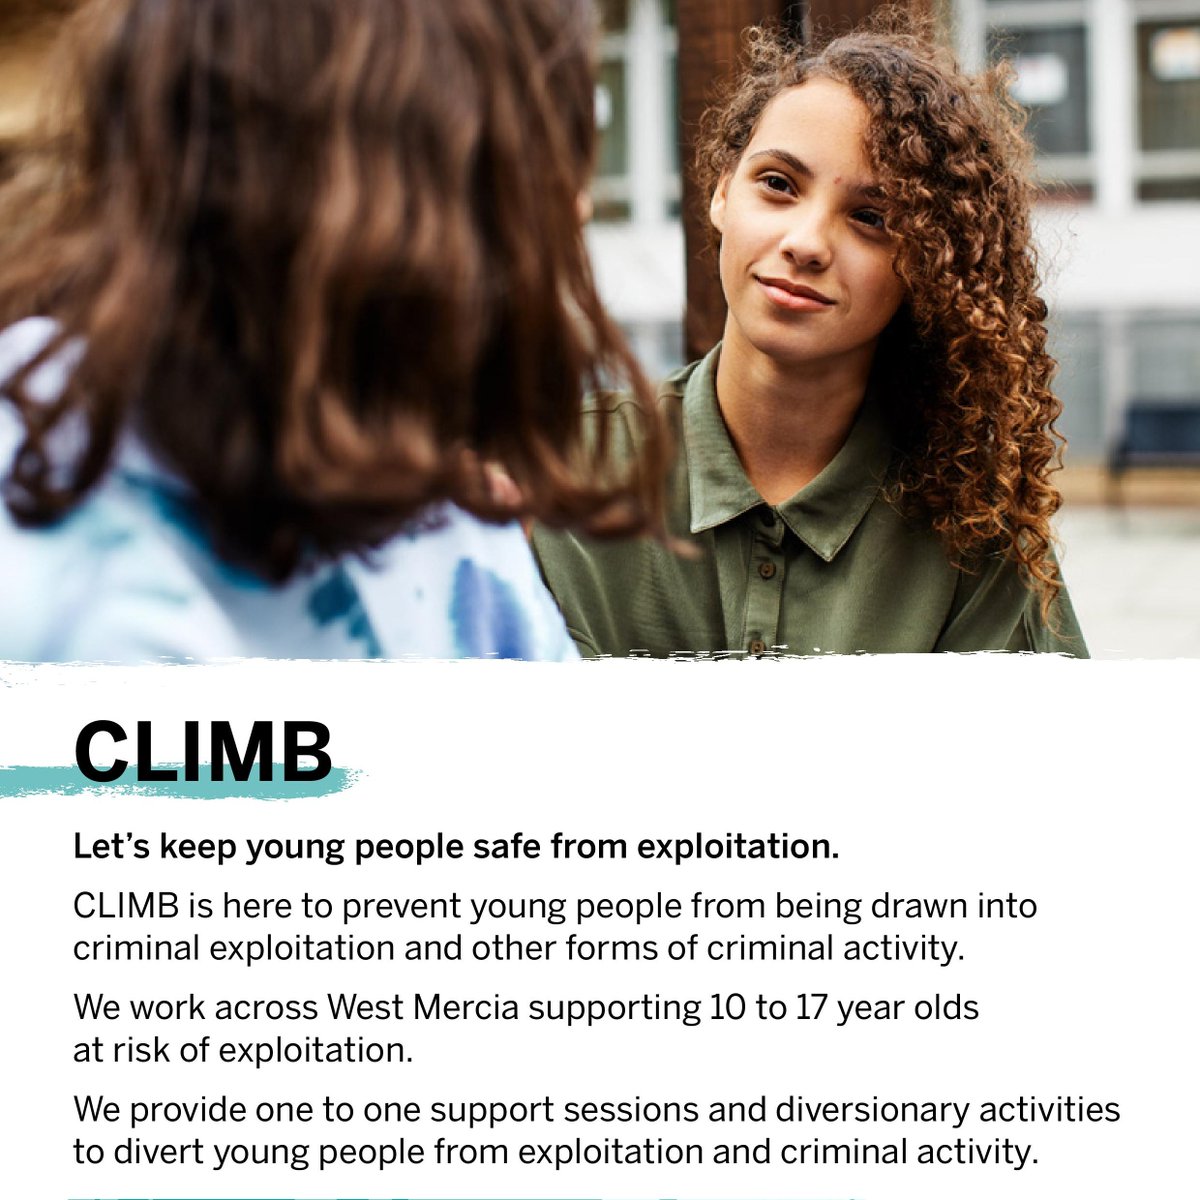 Hello! We’re Team #Climb! We're a preventive service working with young people at risk of #CriminalExploitation in #WestMercia. We get young people involved with positive activities and help give them hope for the future💪